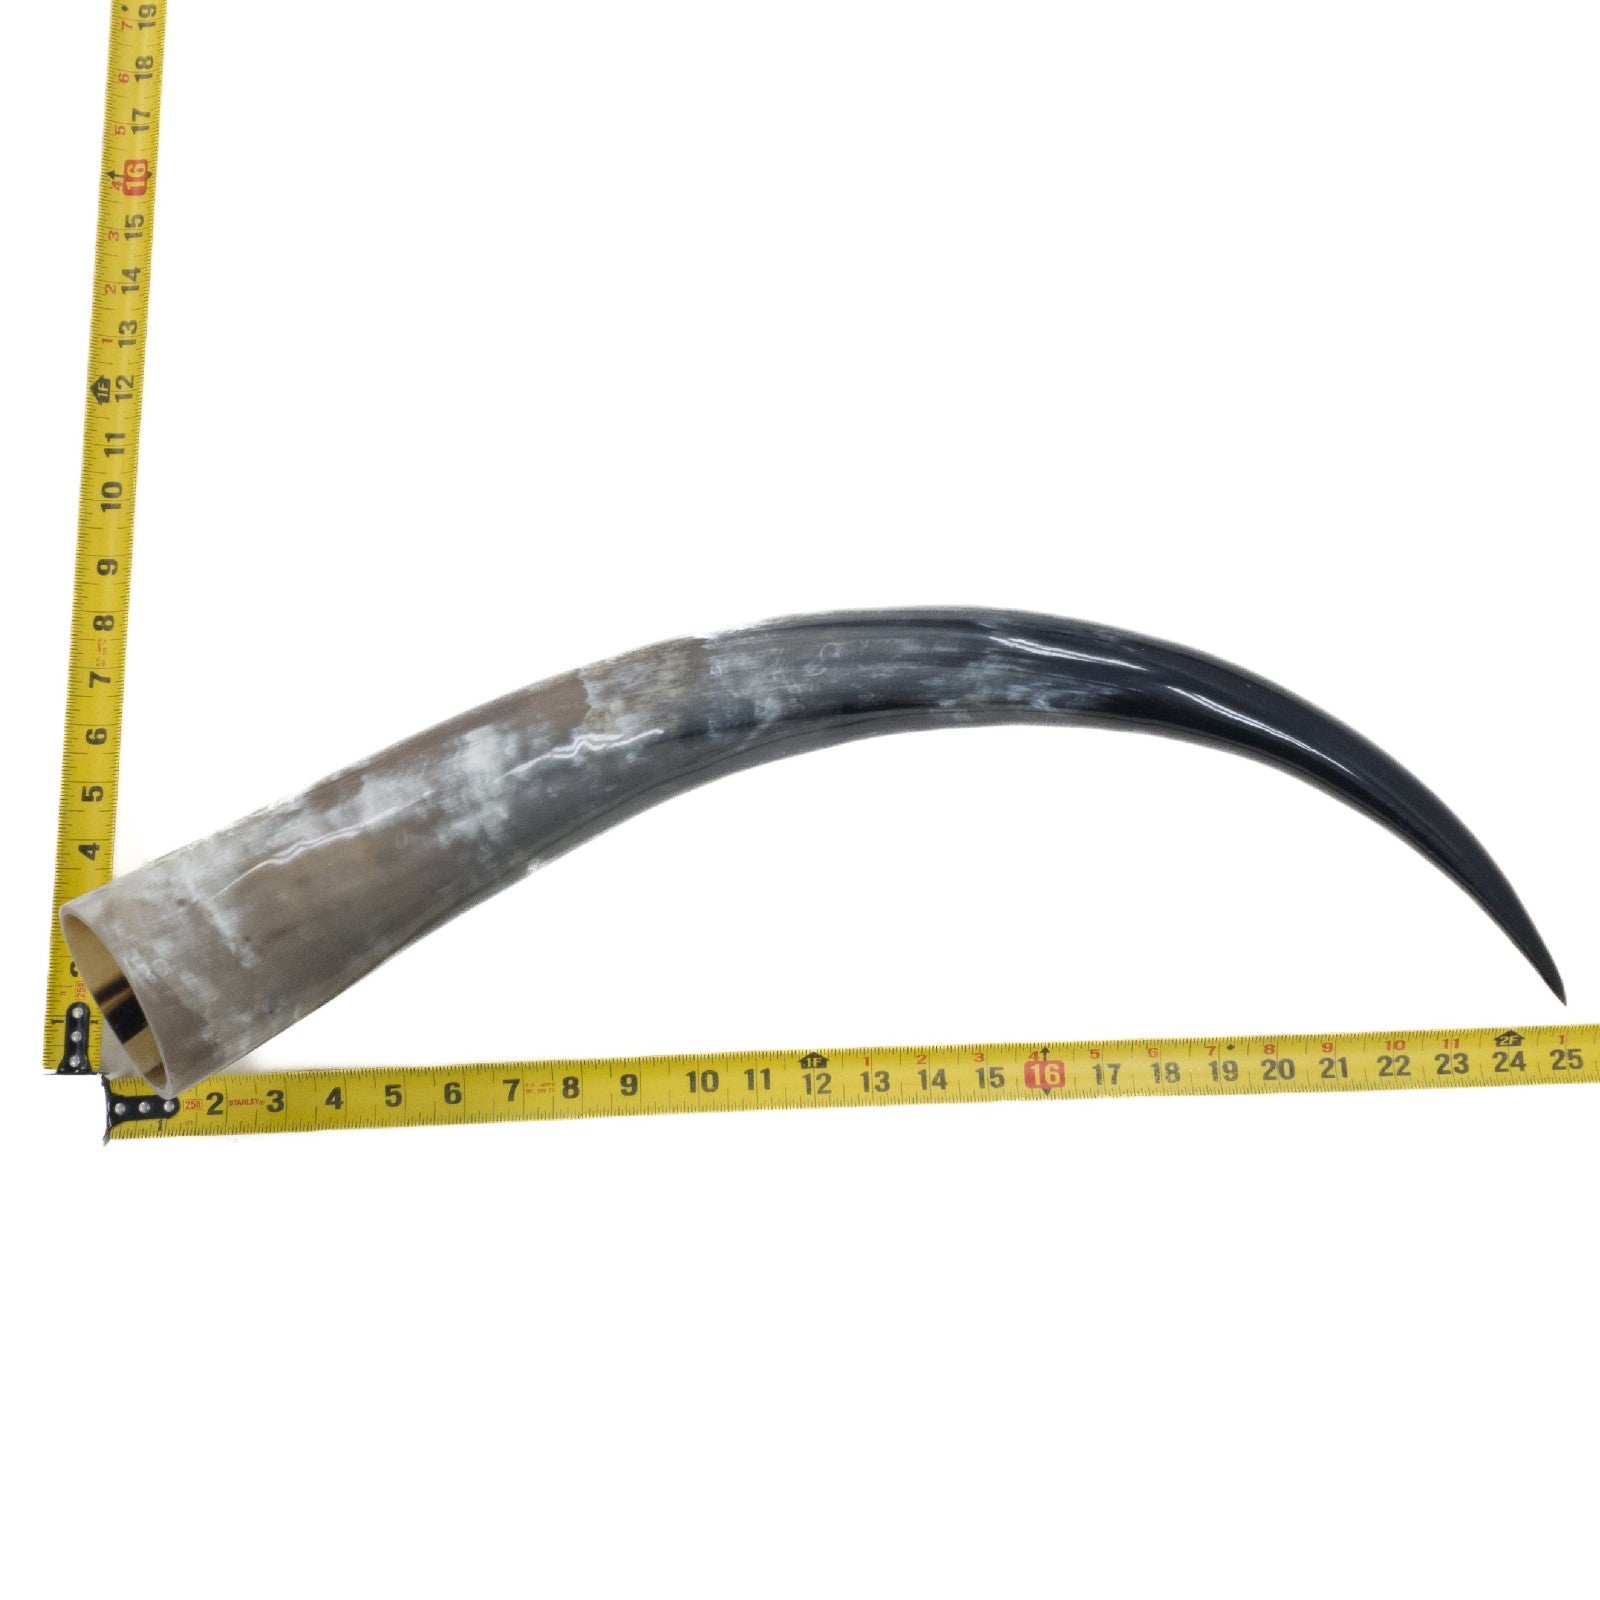 24" - 30" Single Polished Cow Horns, 15 (25") | The Leather Guy